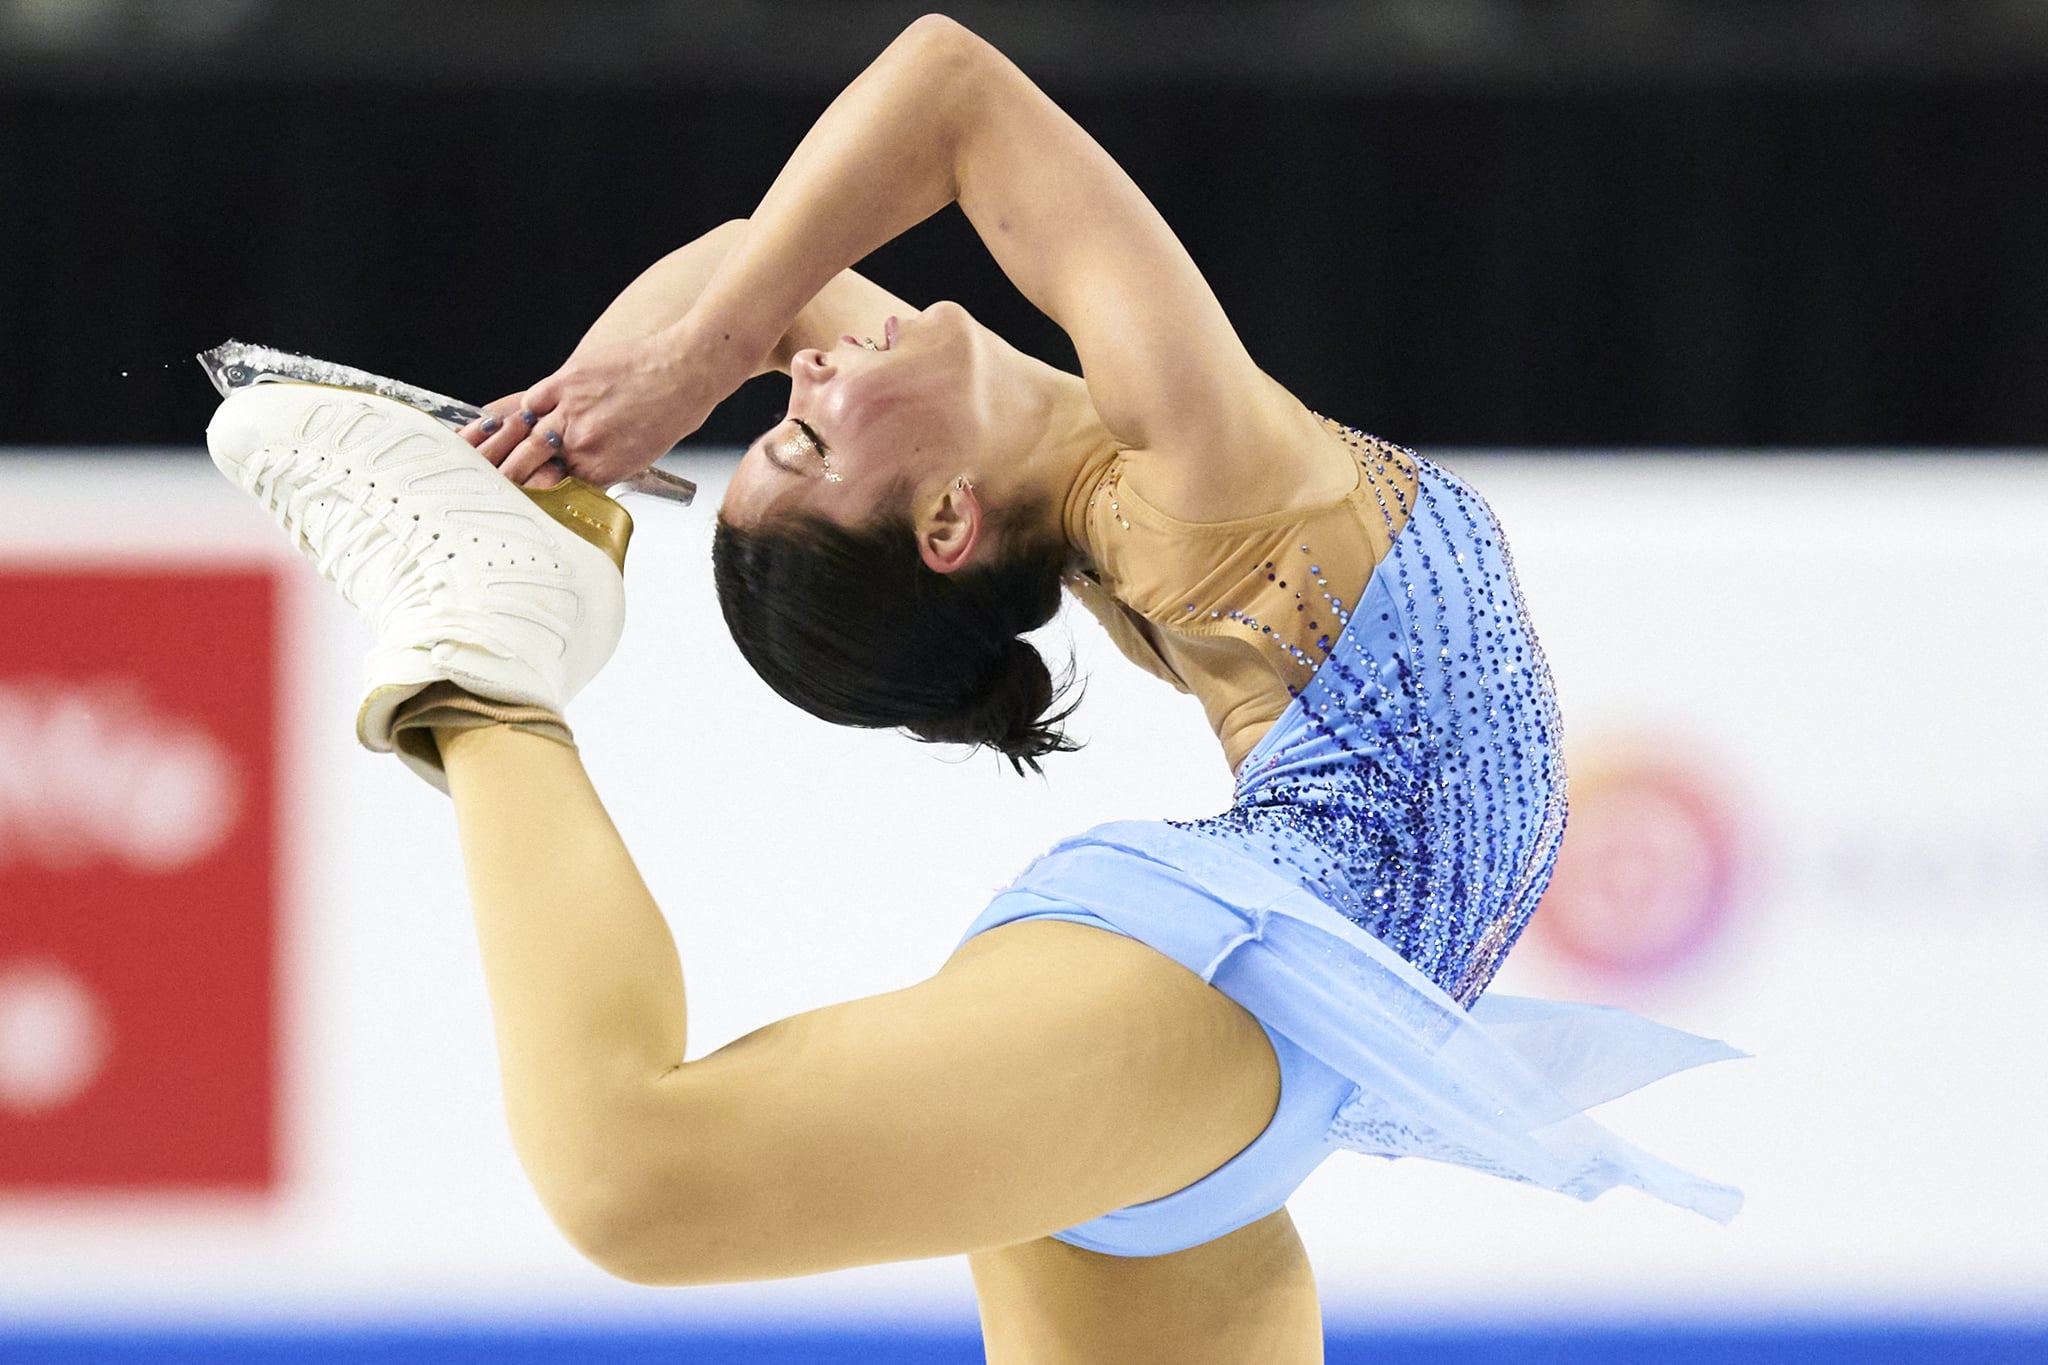 Alysa Liu of the United States skates her free skate in the womens competition at Skate Canada International in Vancouver, British Columbia on October 30, 2021. (Photo by Geoff Robins / AFP) (Photo by GEOFF ROBINS/AFP via Getty Images)